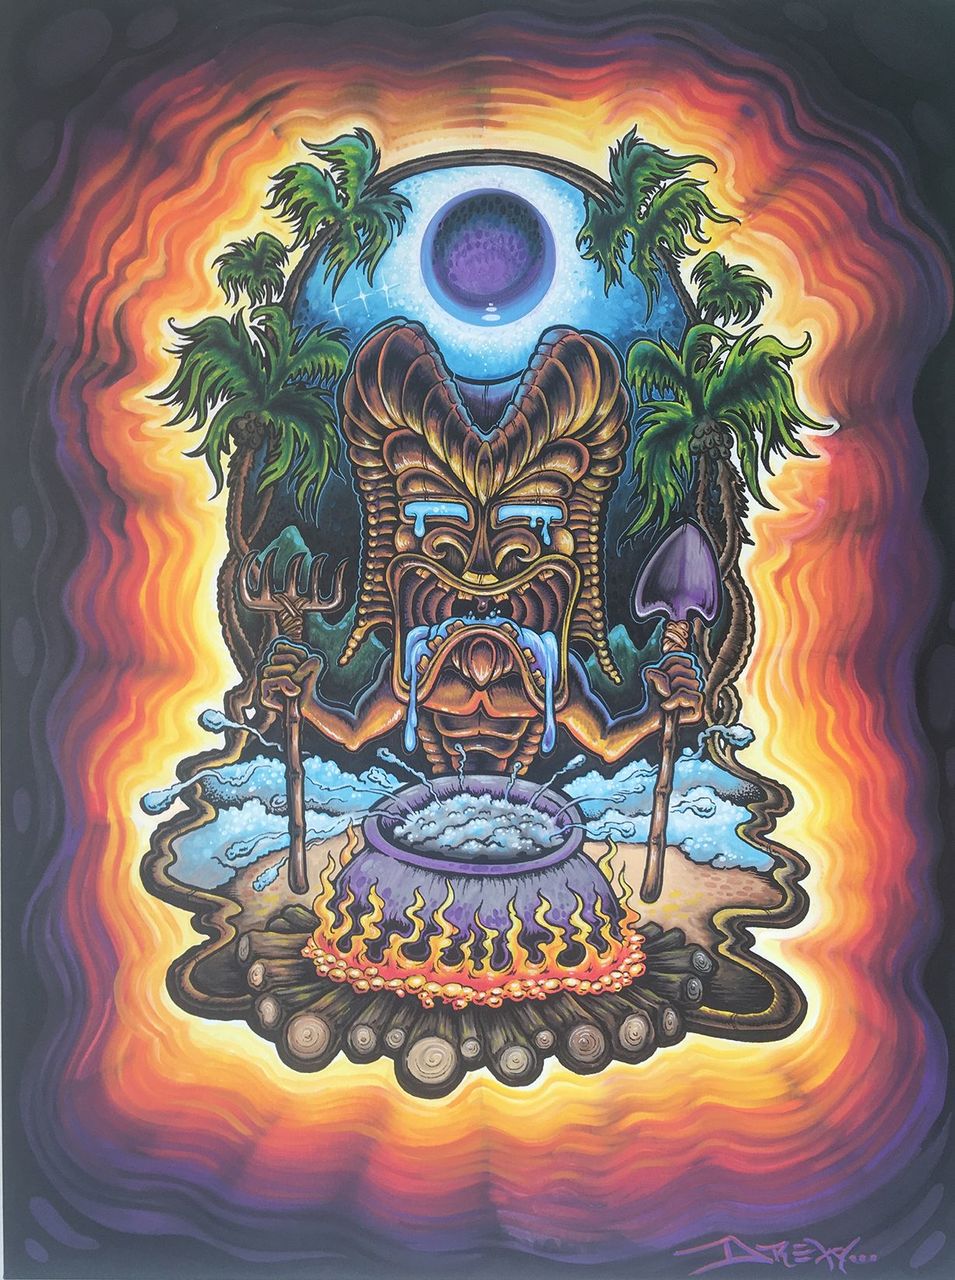 SOLD!  MIDNIGHT TIKI 40" x 30" Original painting on Canvas by Drew Brophy MOTHER EARTH SERIES